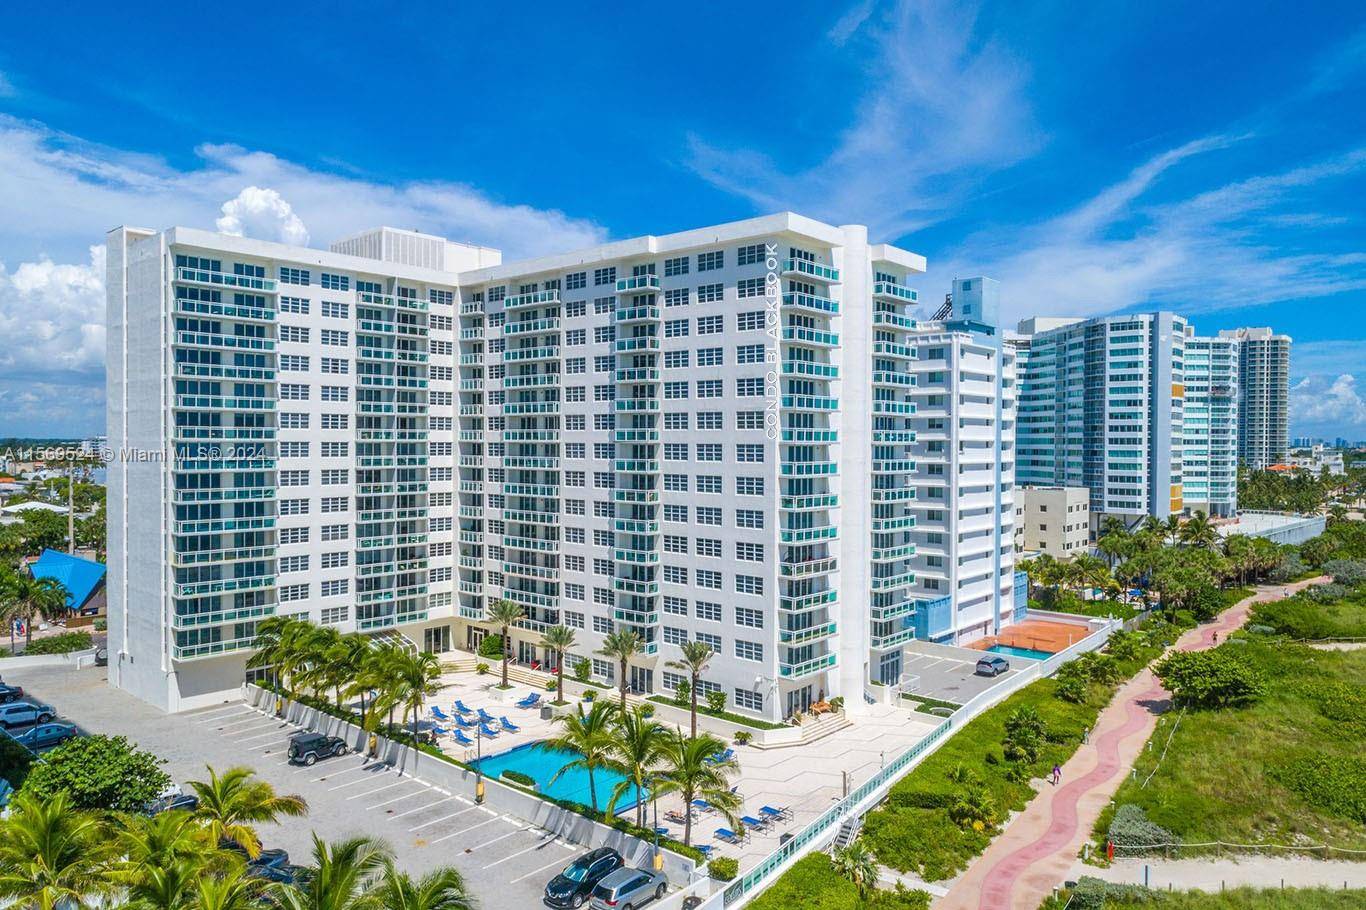 Spacious 2 bedroom condo with ocean views located at in an oceanfront building in Miami Beach.